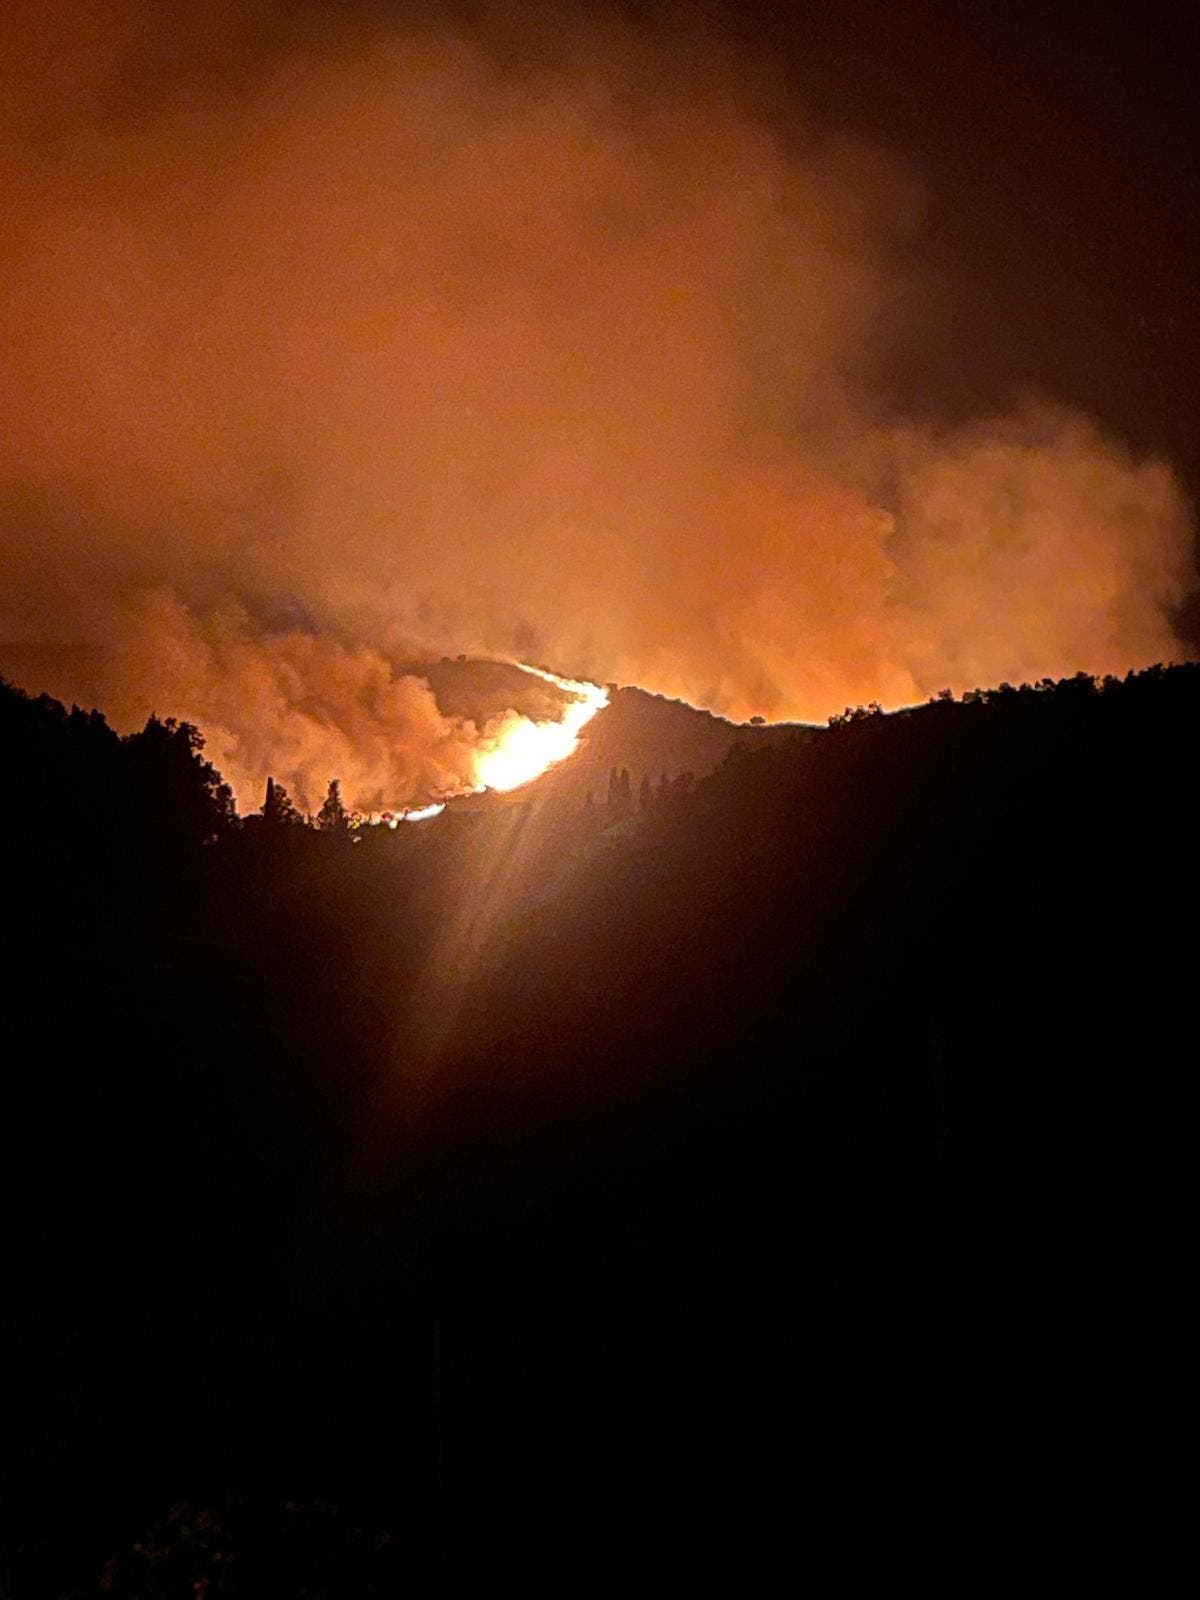 Brit family in Corfu describe holiday horror after returning from dinner to ‘bank of flames coming down the hillside’